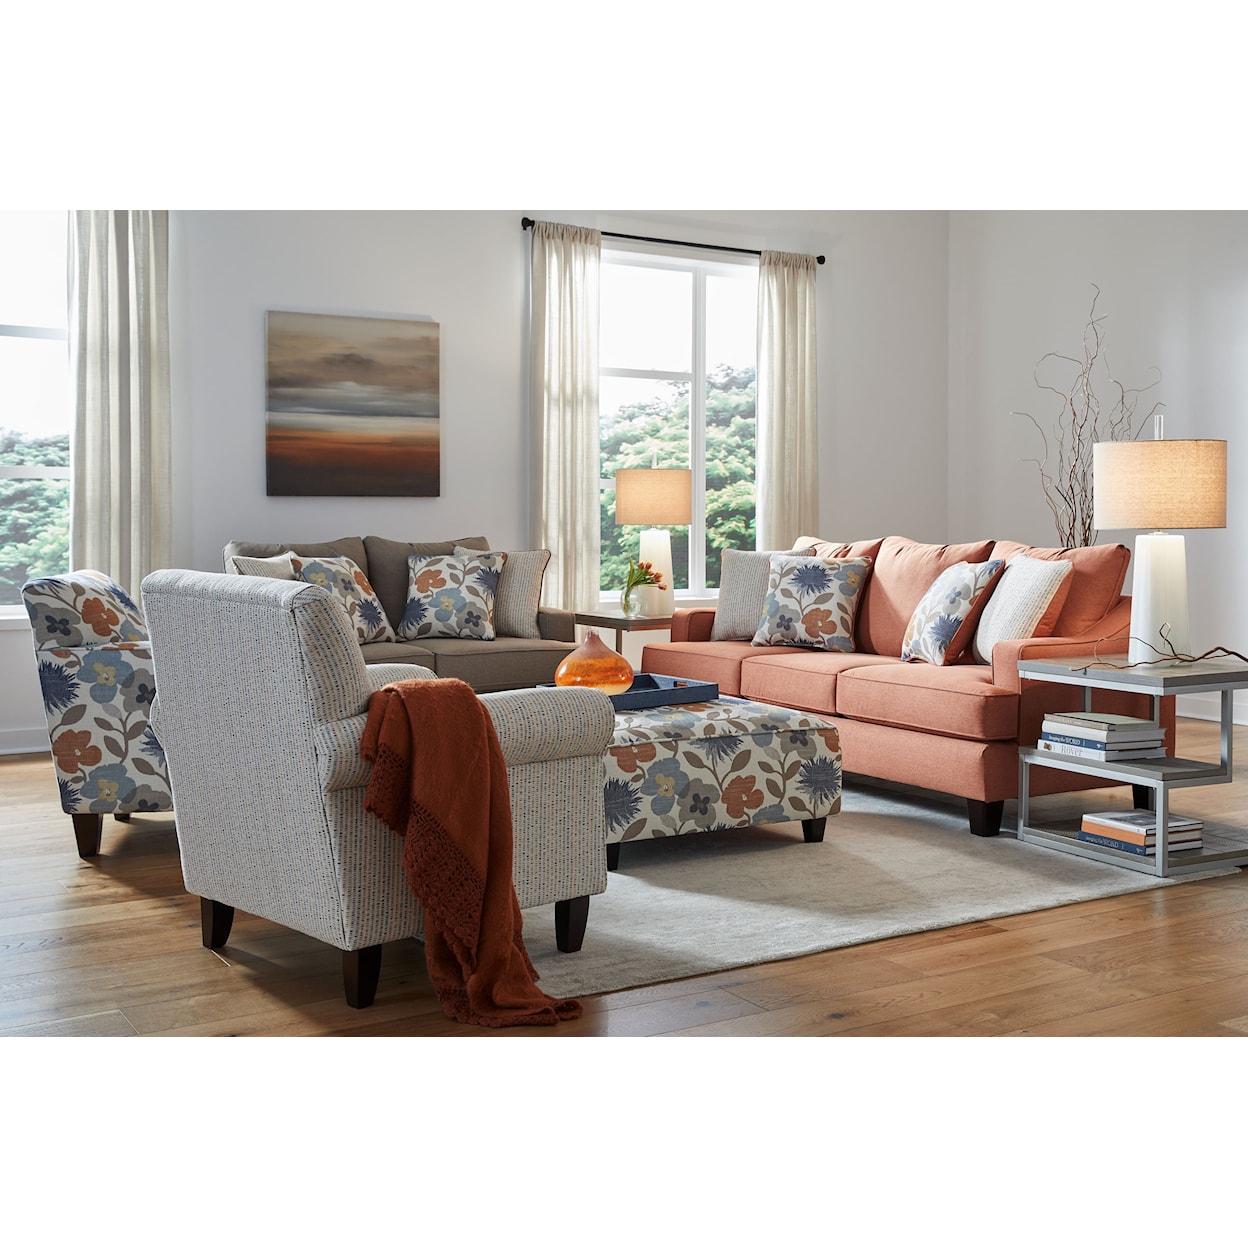 Fusion Furniture 2330 LAURENT Accent Chair